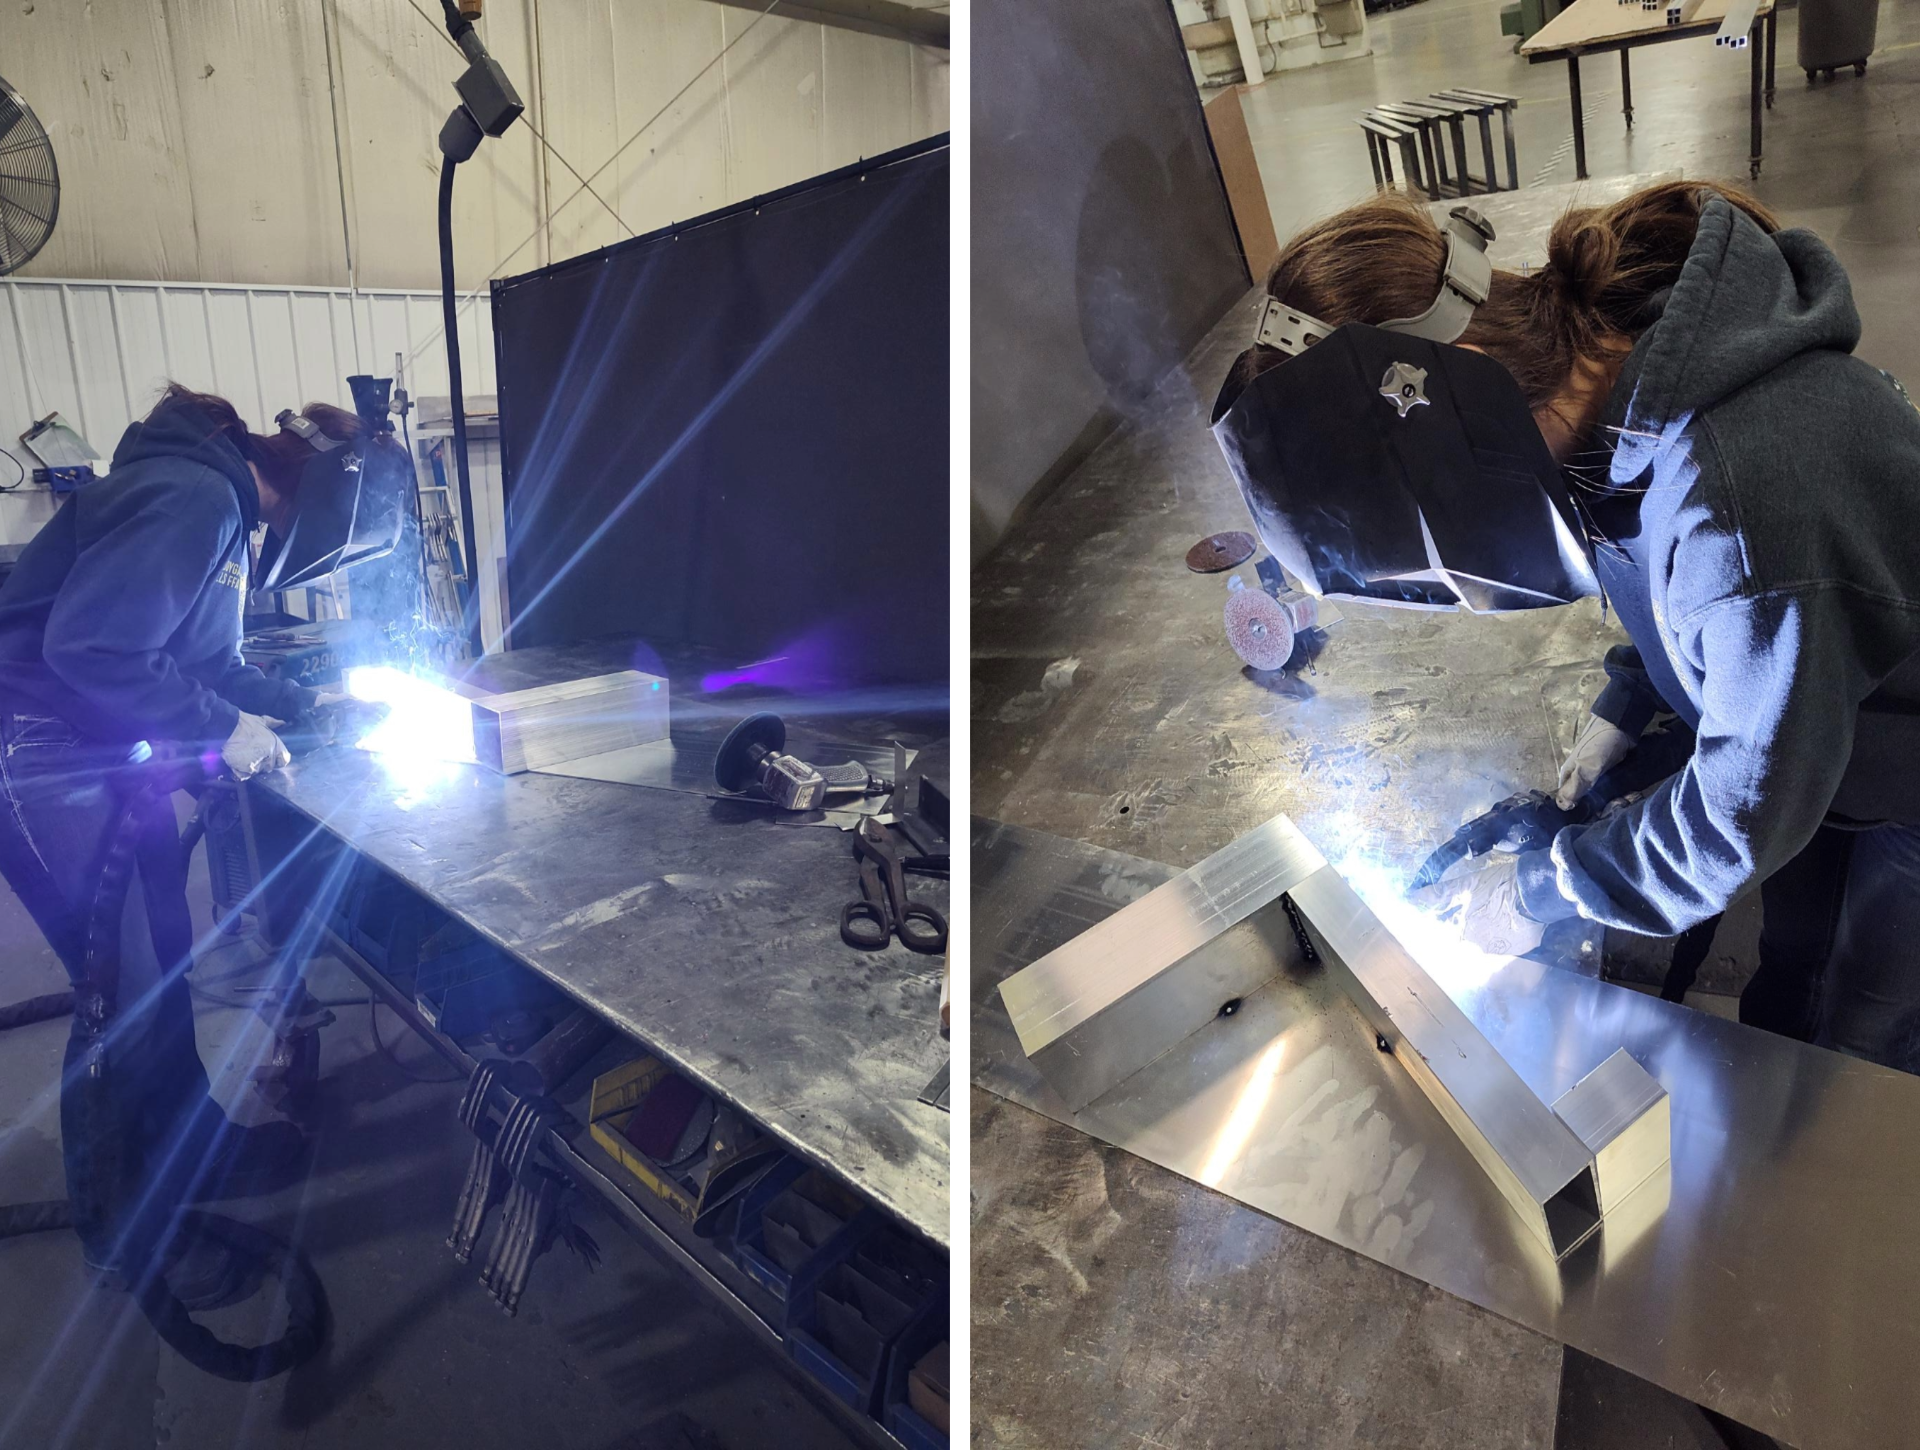 Wisconsin Youth Apprentices Welding